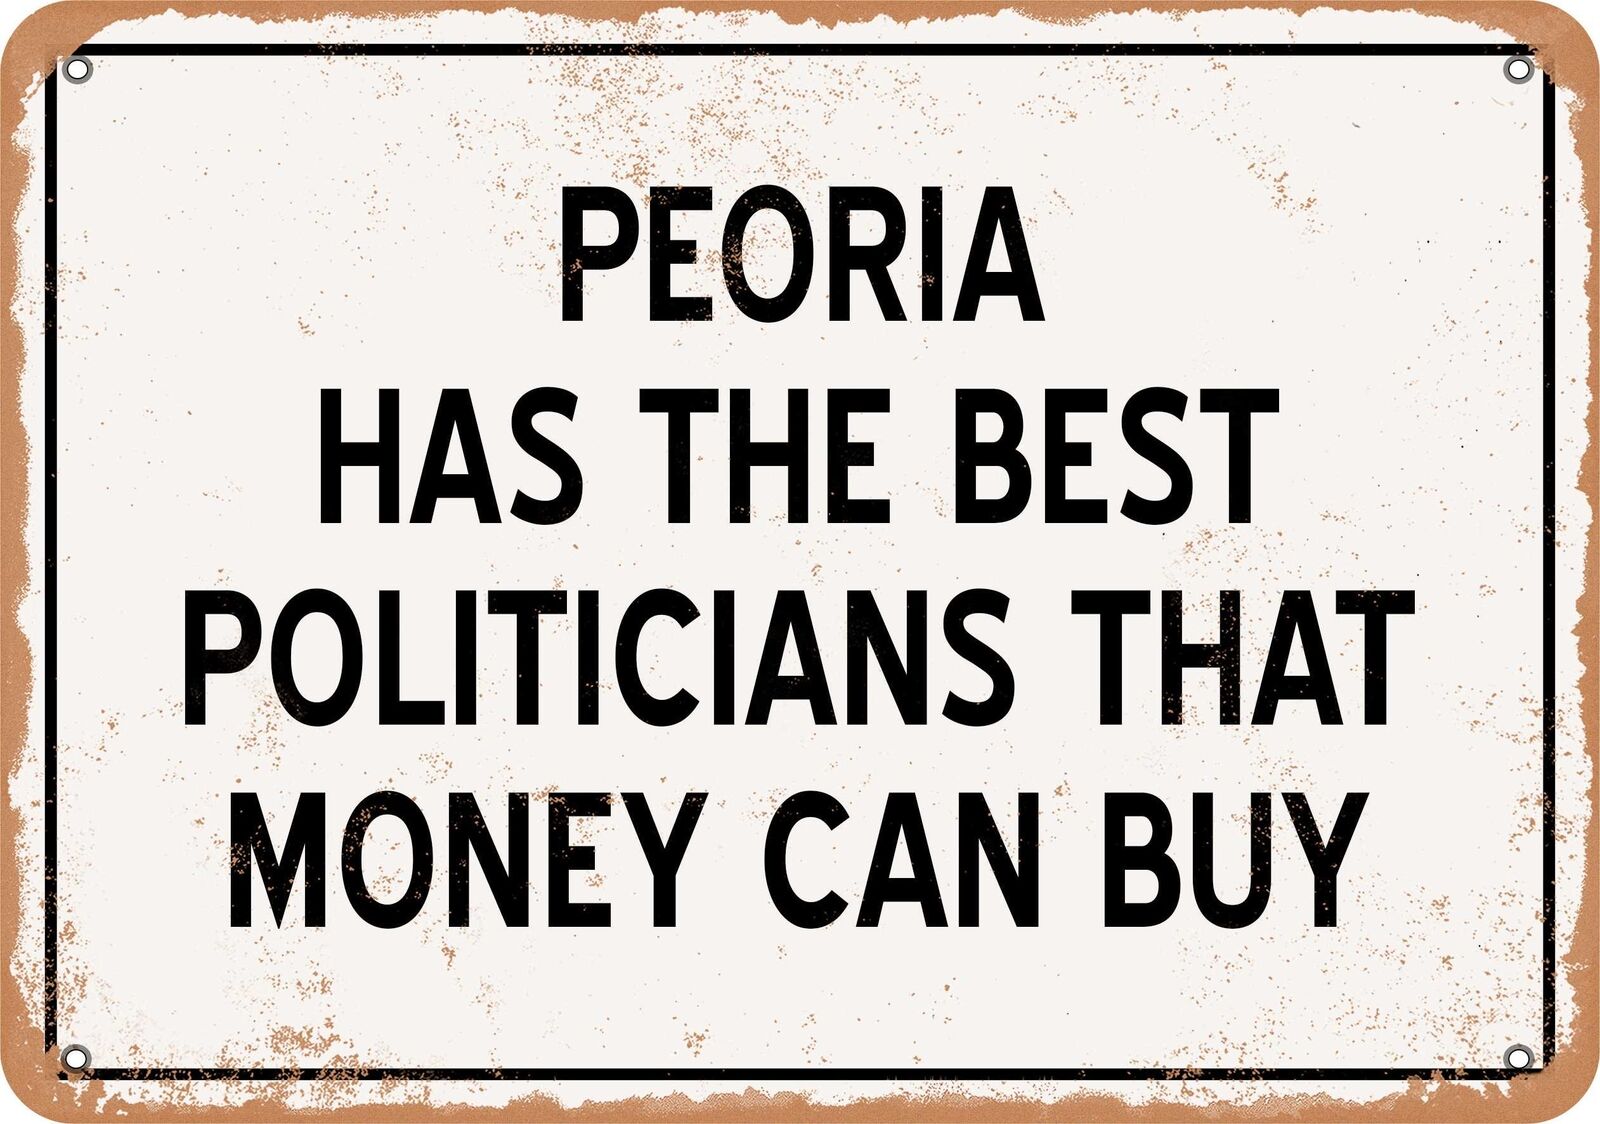 Metal Sign - Peoria Politicians Are the Best Money Can Buy - Rust Look